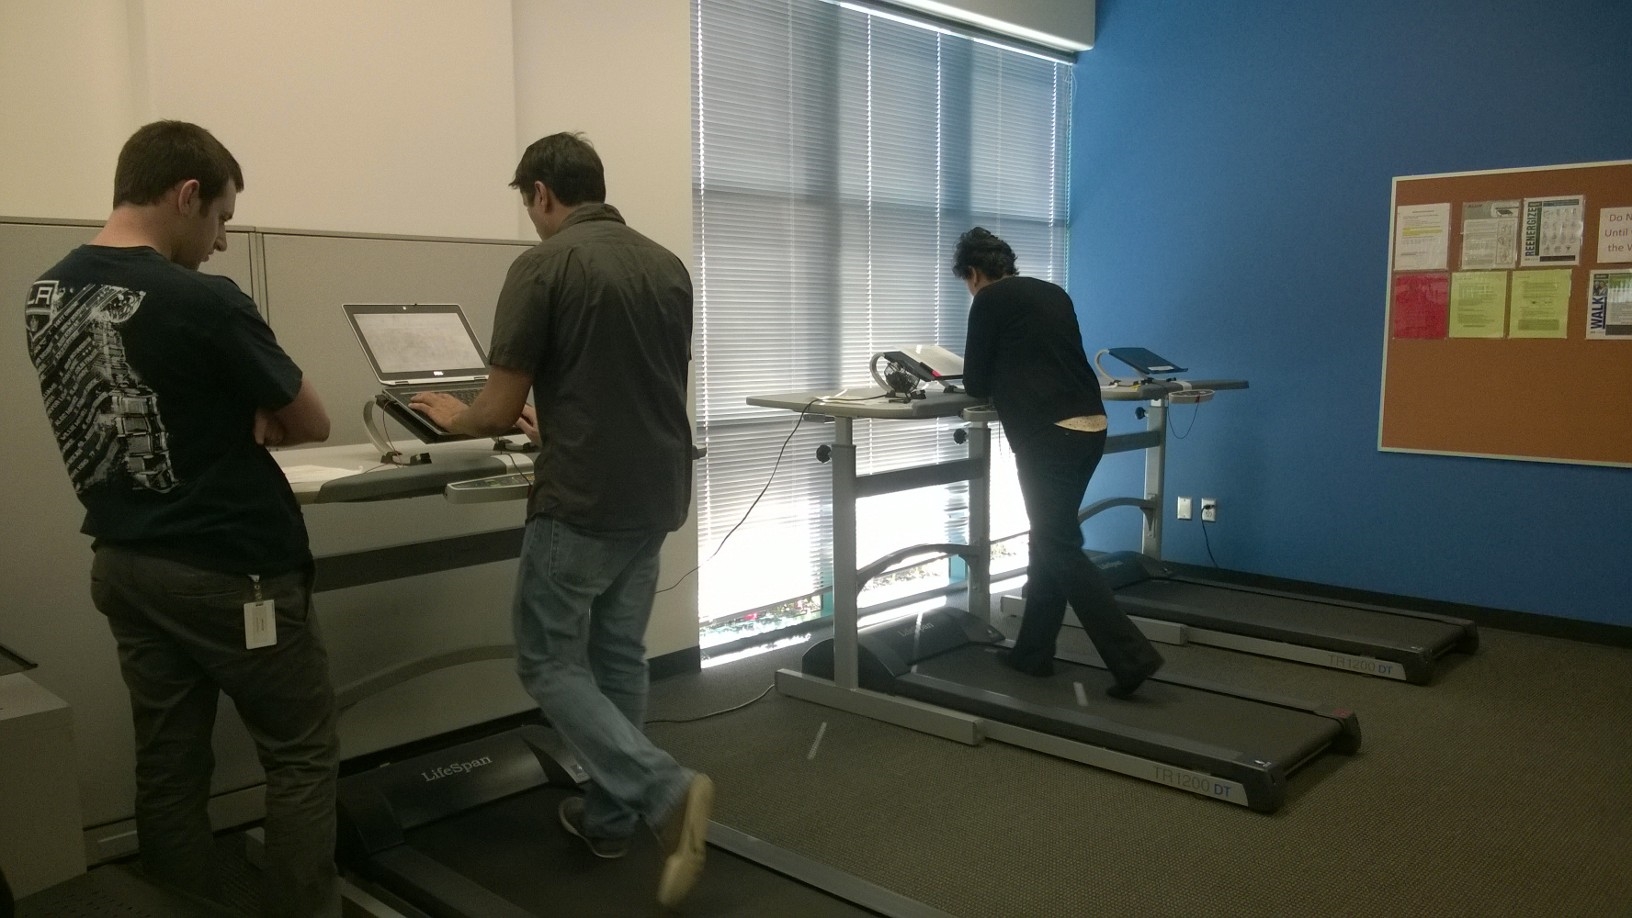 Employees getting some exercise while working on our treadmill desks.